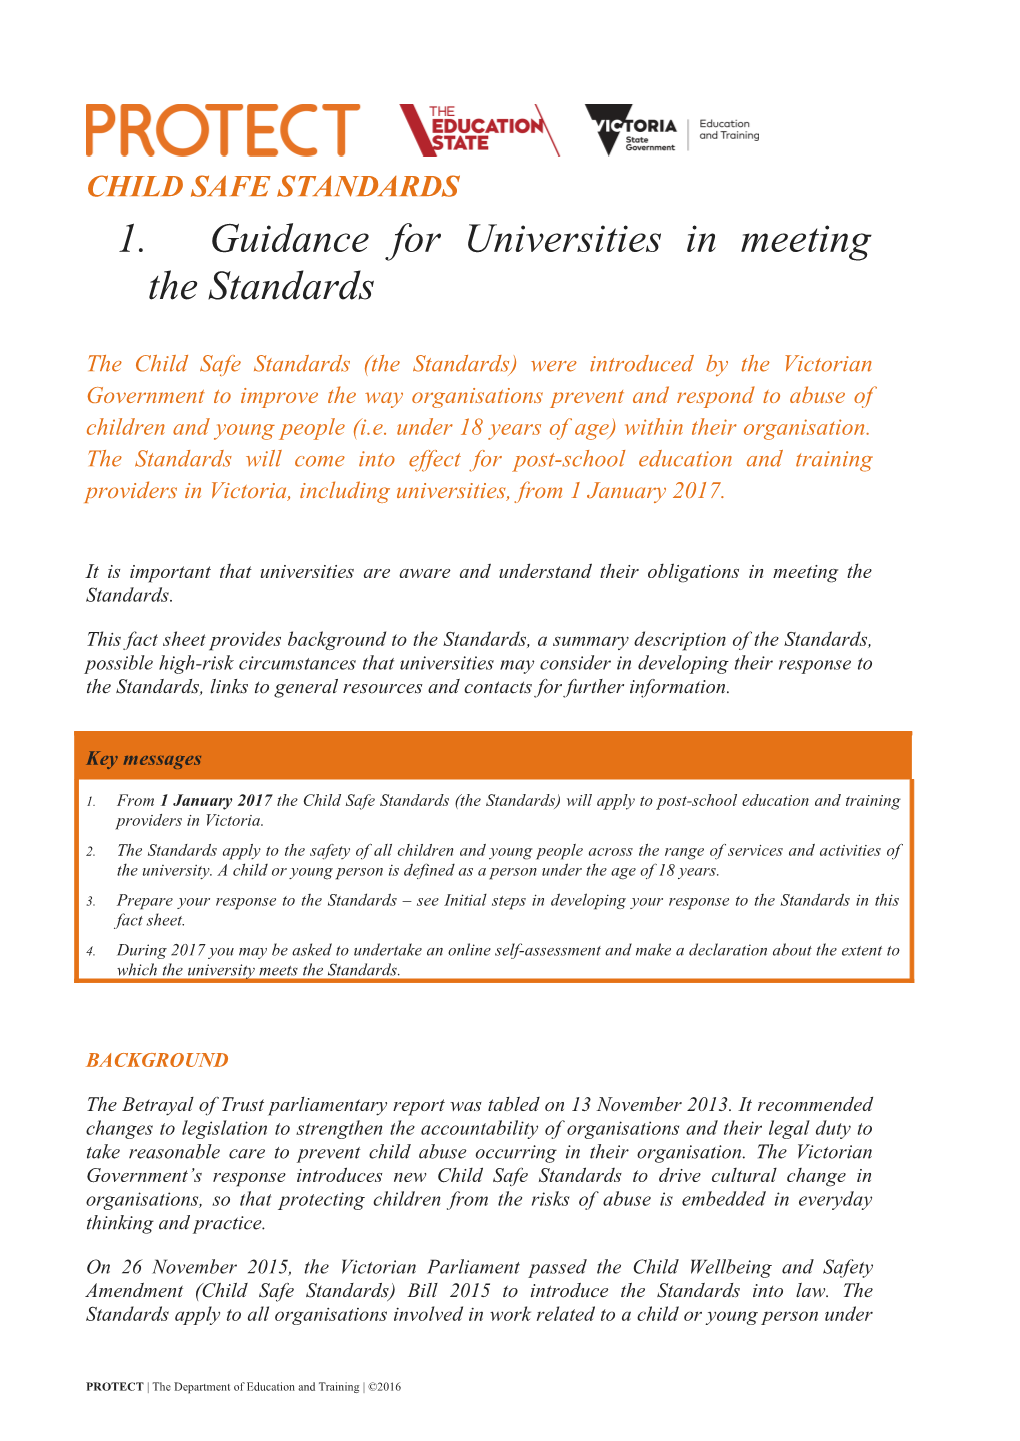 Guidance for Universities in Meeting the Standards